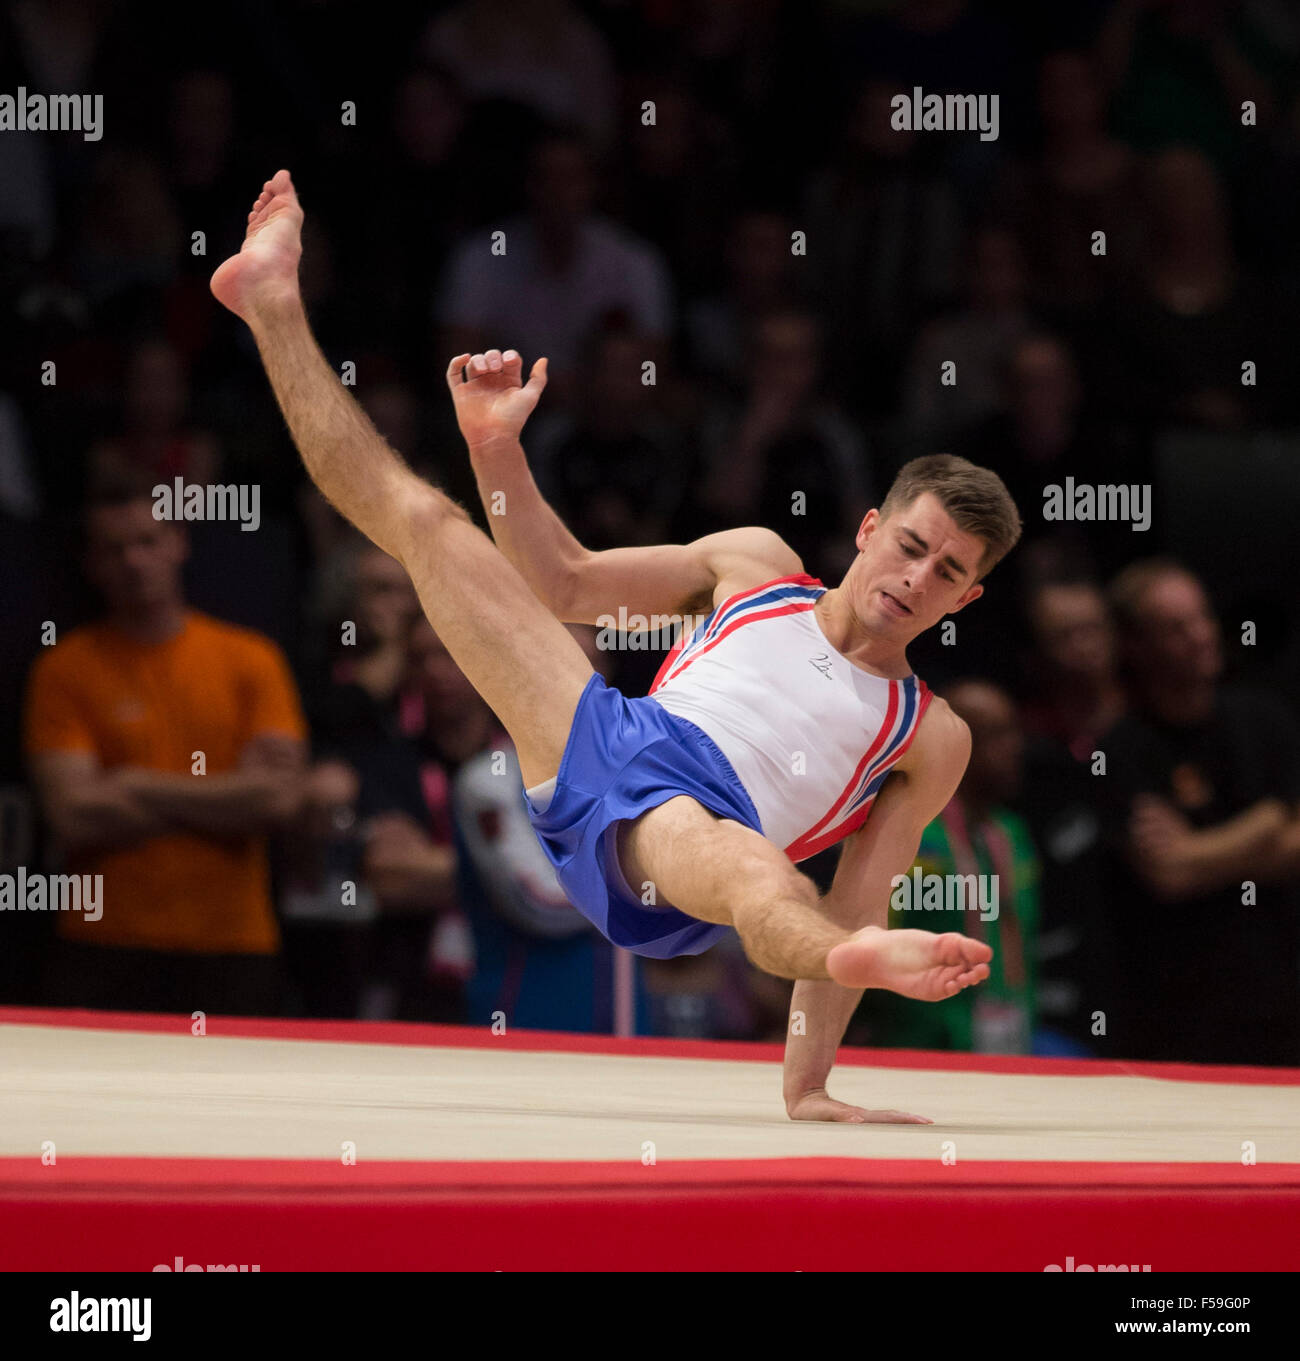 Max Whitlock photo English gymnast Floor exercise 1738 CLEARANCE SALE!!! 